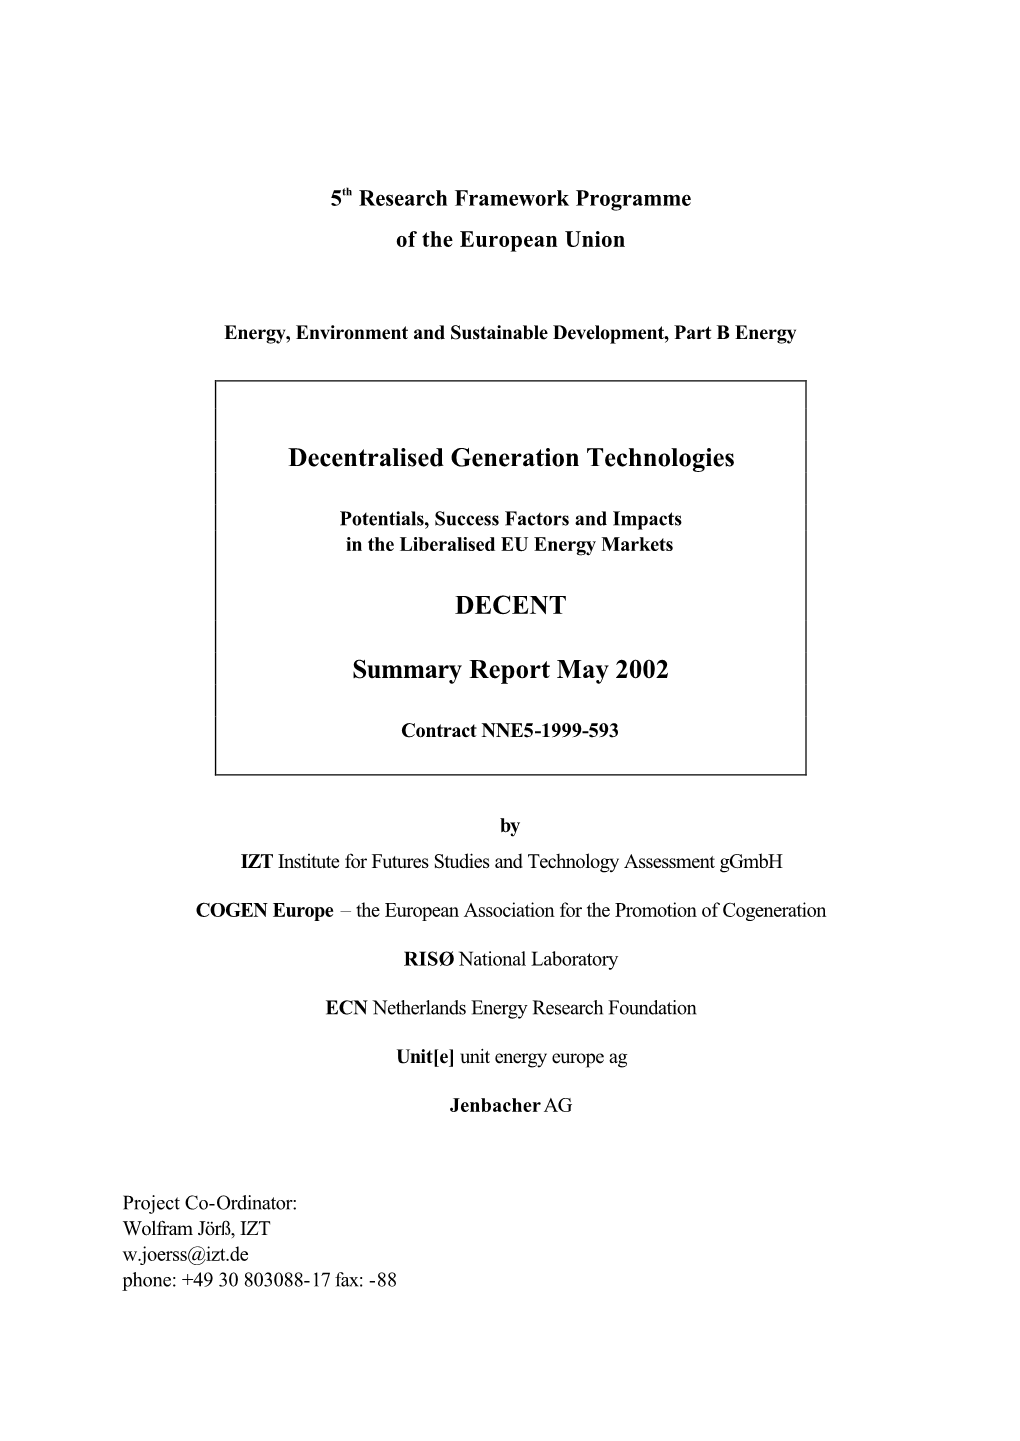 DECENT Summary Report Ii Contributions to the DECENT Project Were Made By